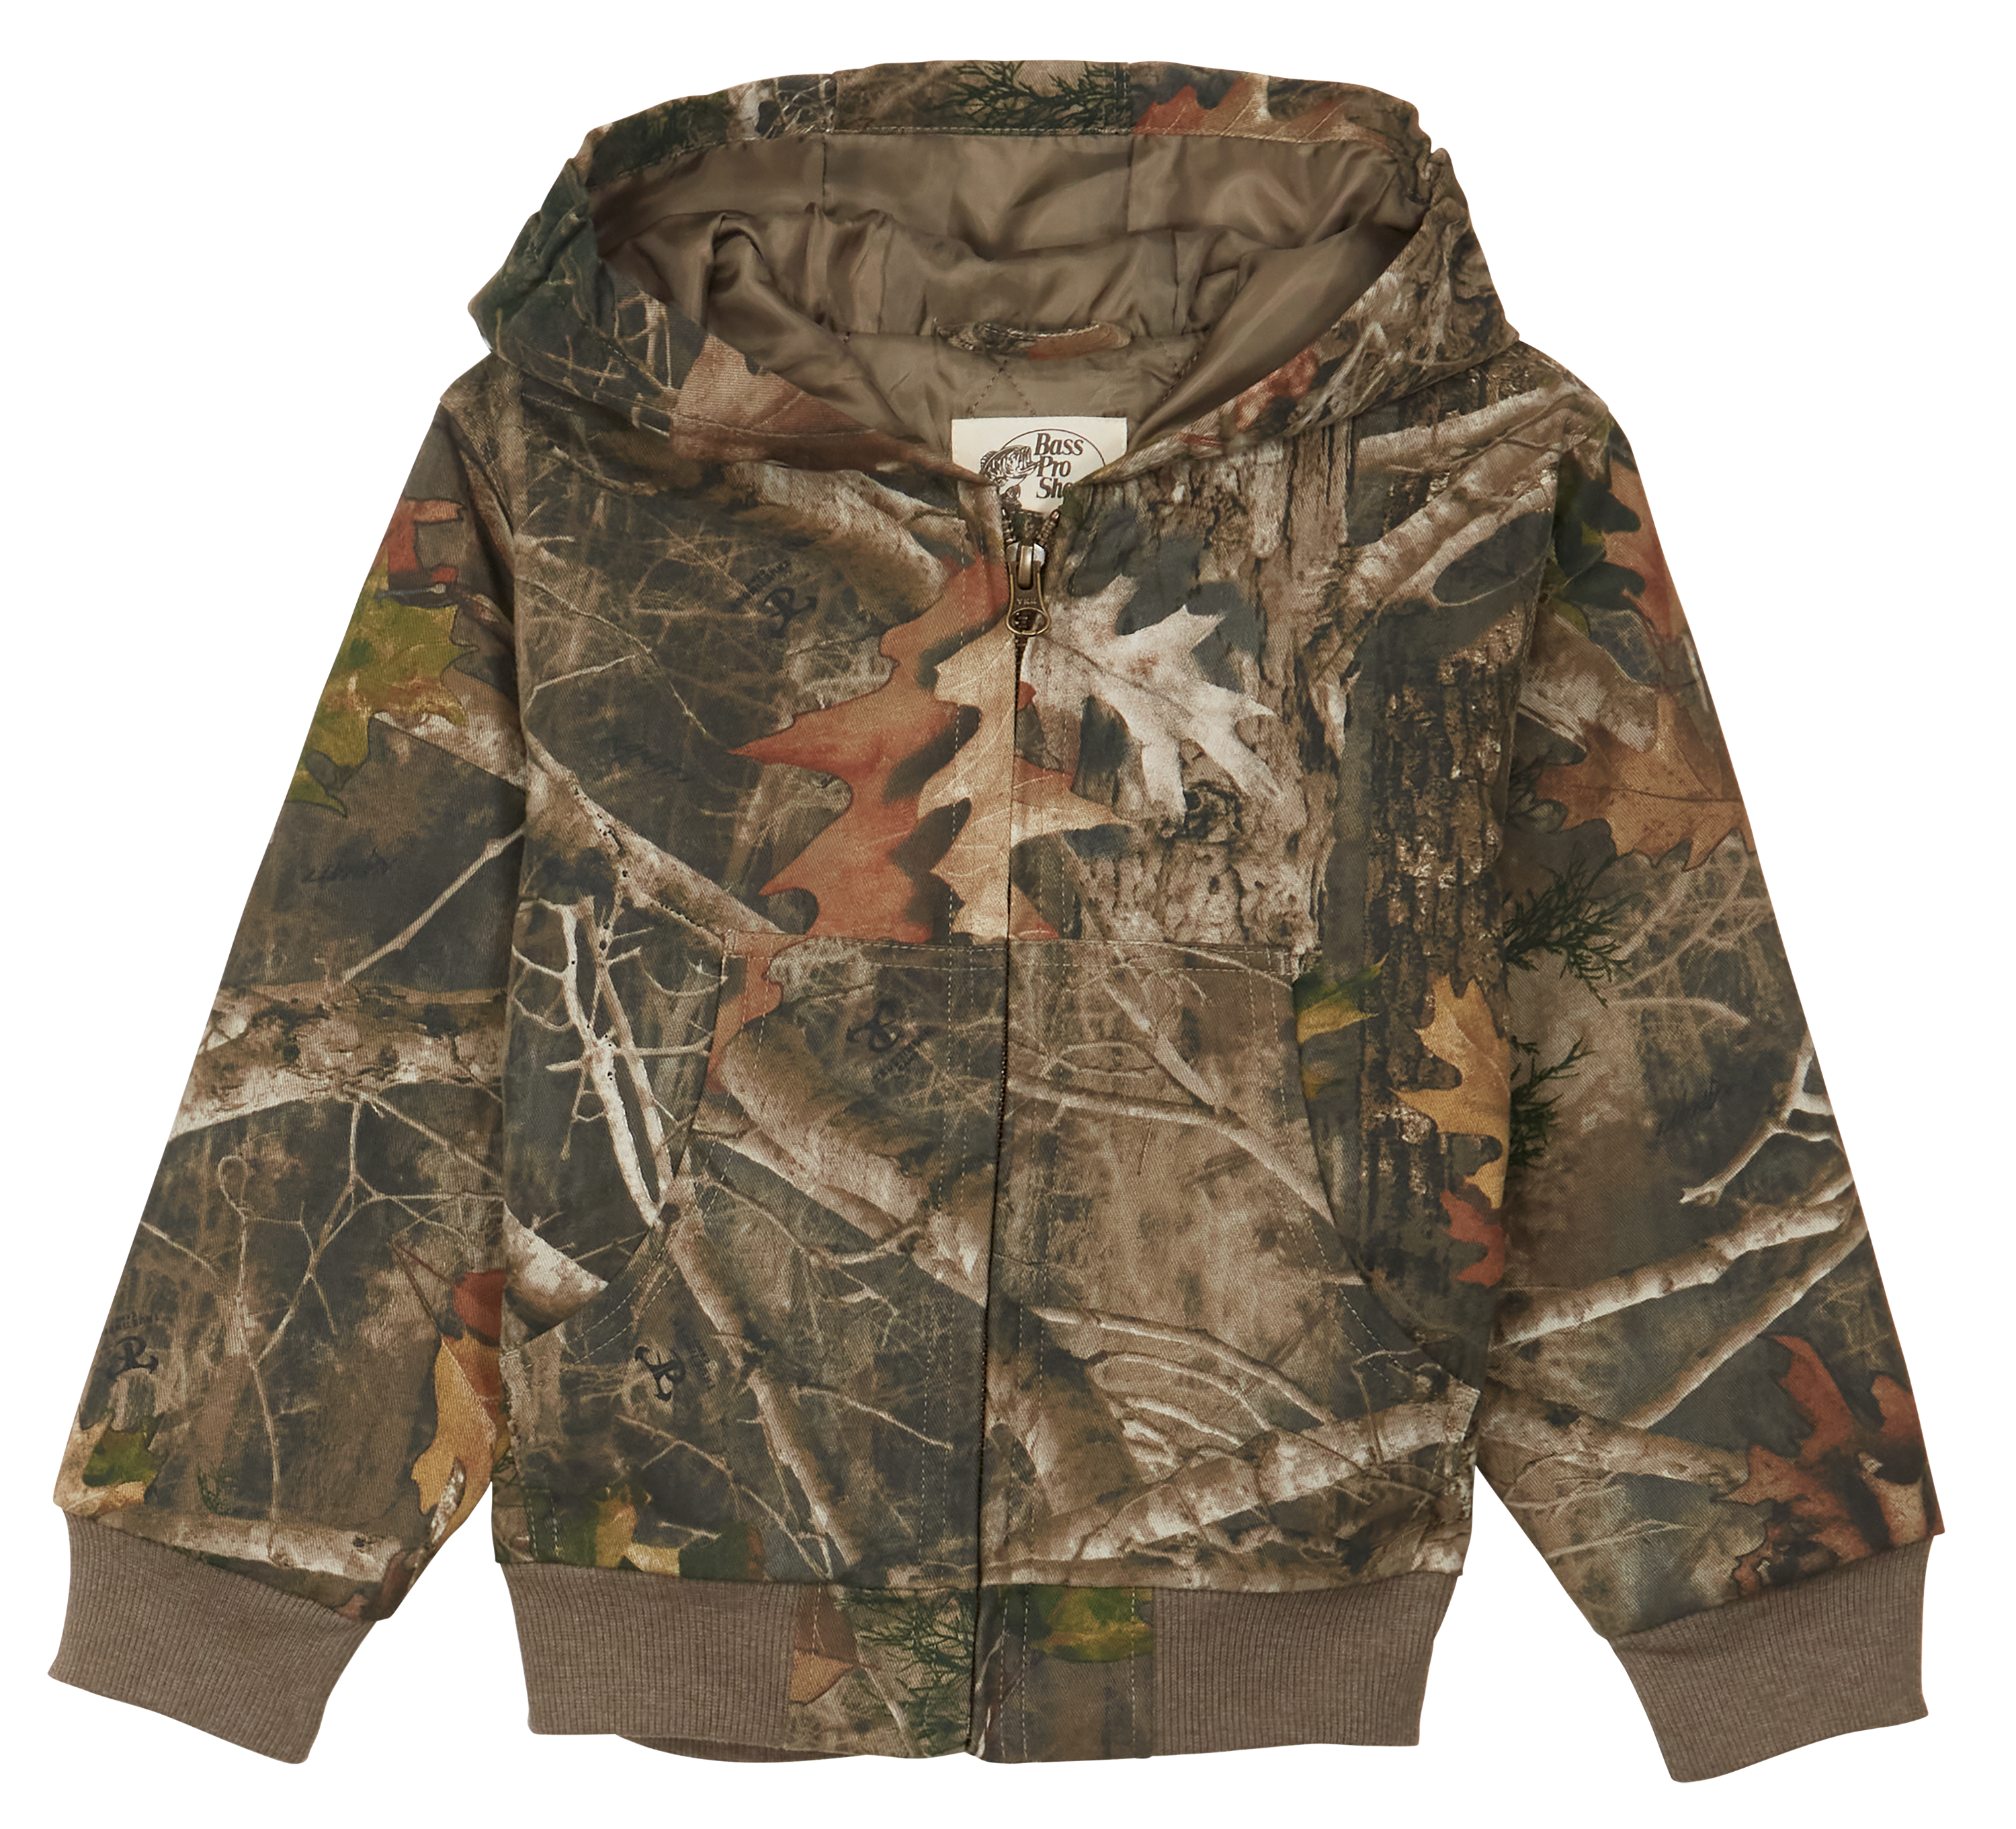 Bass Pro Shops Hooded Camo Jacket for Babies or Toddlers